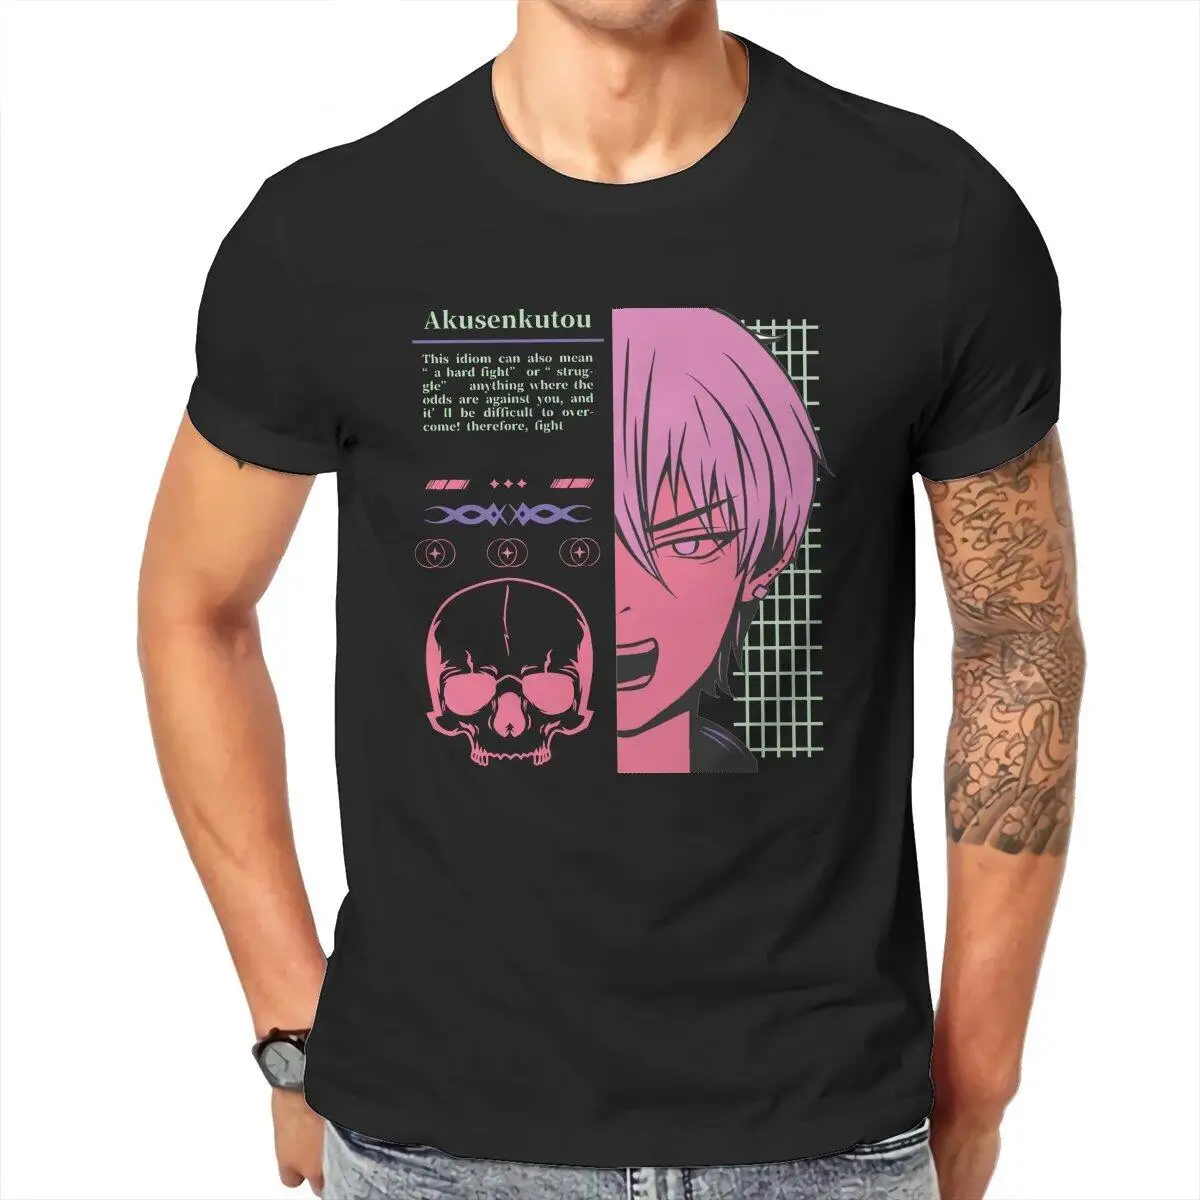 Serial Experiments Lain T Shirt Men's 100% Cotton Casual T-Shirt Round Collar Japanese Anime Tees Short Sleeve Clothing Original